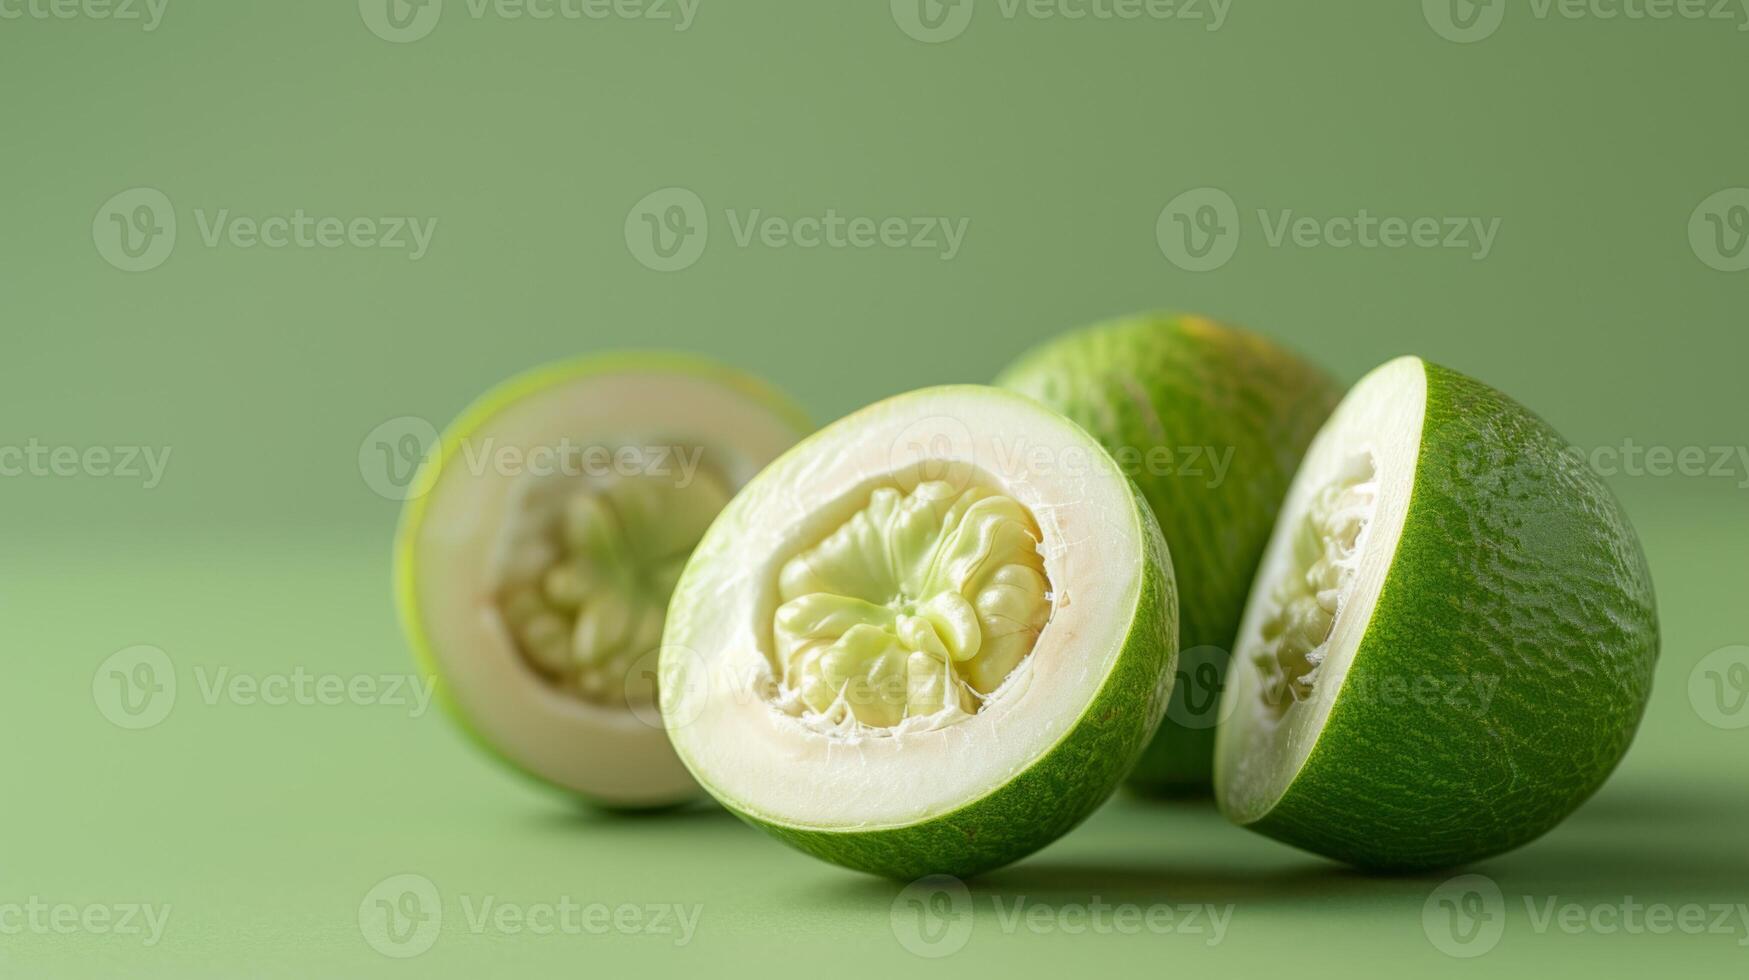 Half-cut green walnuts on a vibrant background illustrating food, nuts, shell, fresh, and healthy concepts photo